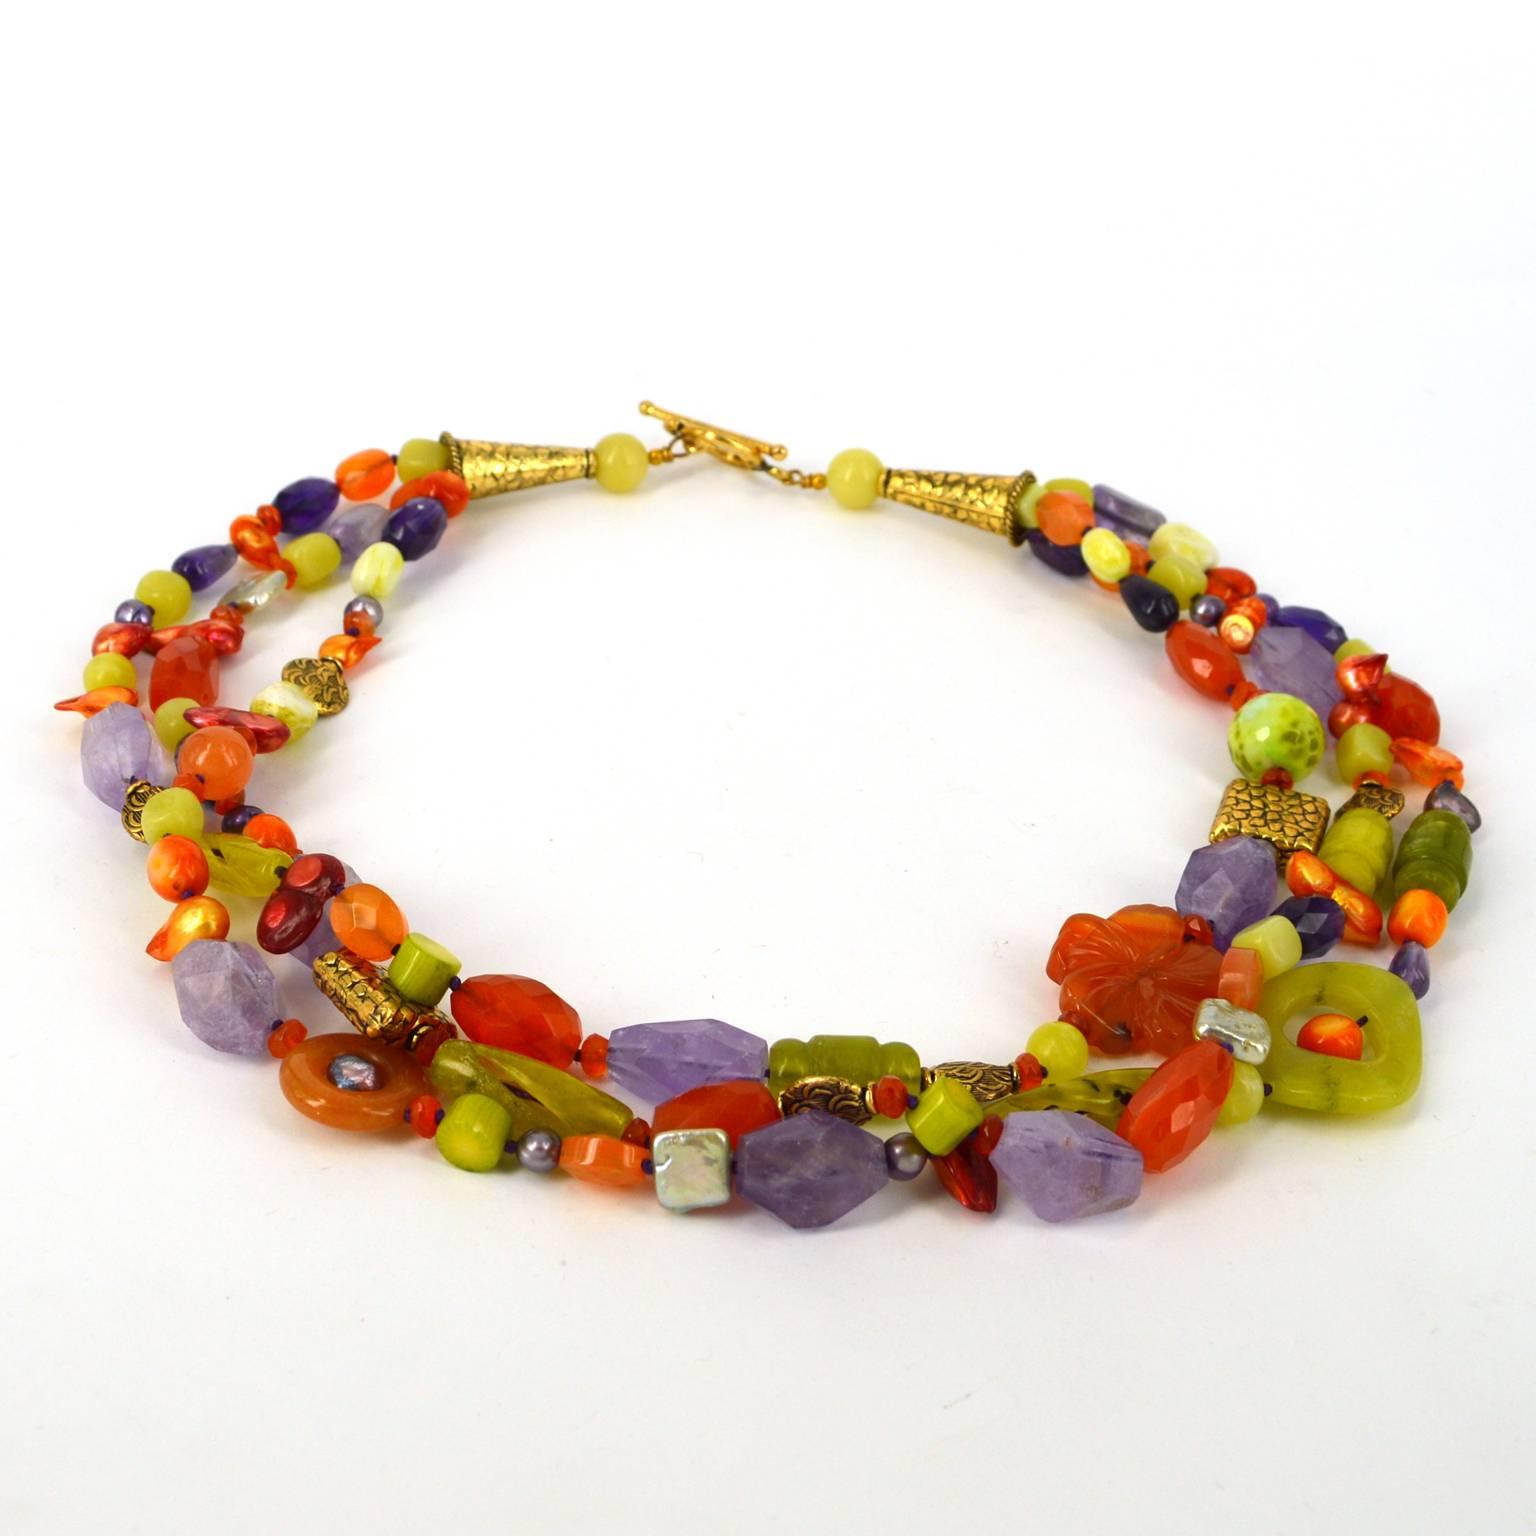 Three strands of an eclectic mix of Amethyst, Carnelian, Jade, Dyed Coral, Freshwater Pearl and Dyed Agate beads. Featuring a gorgeous carved carnelian flower and carved Korean jade. Gold beads and toggle clasp. Hand knotted on amethyst colour